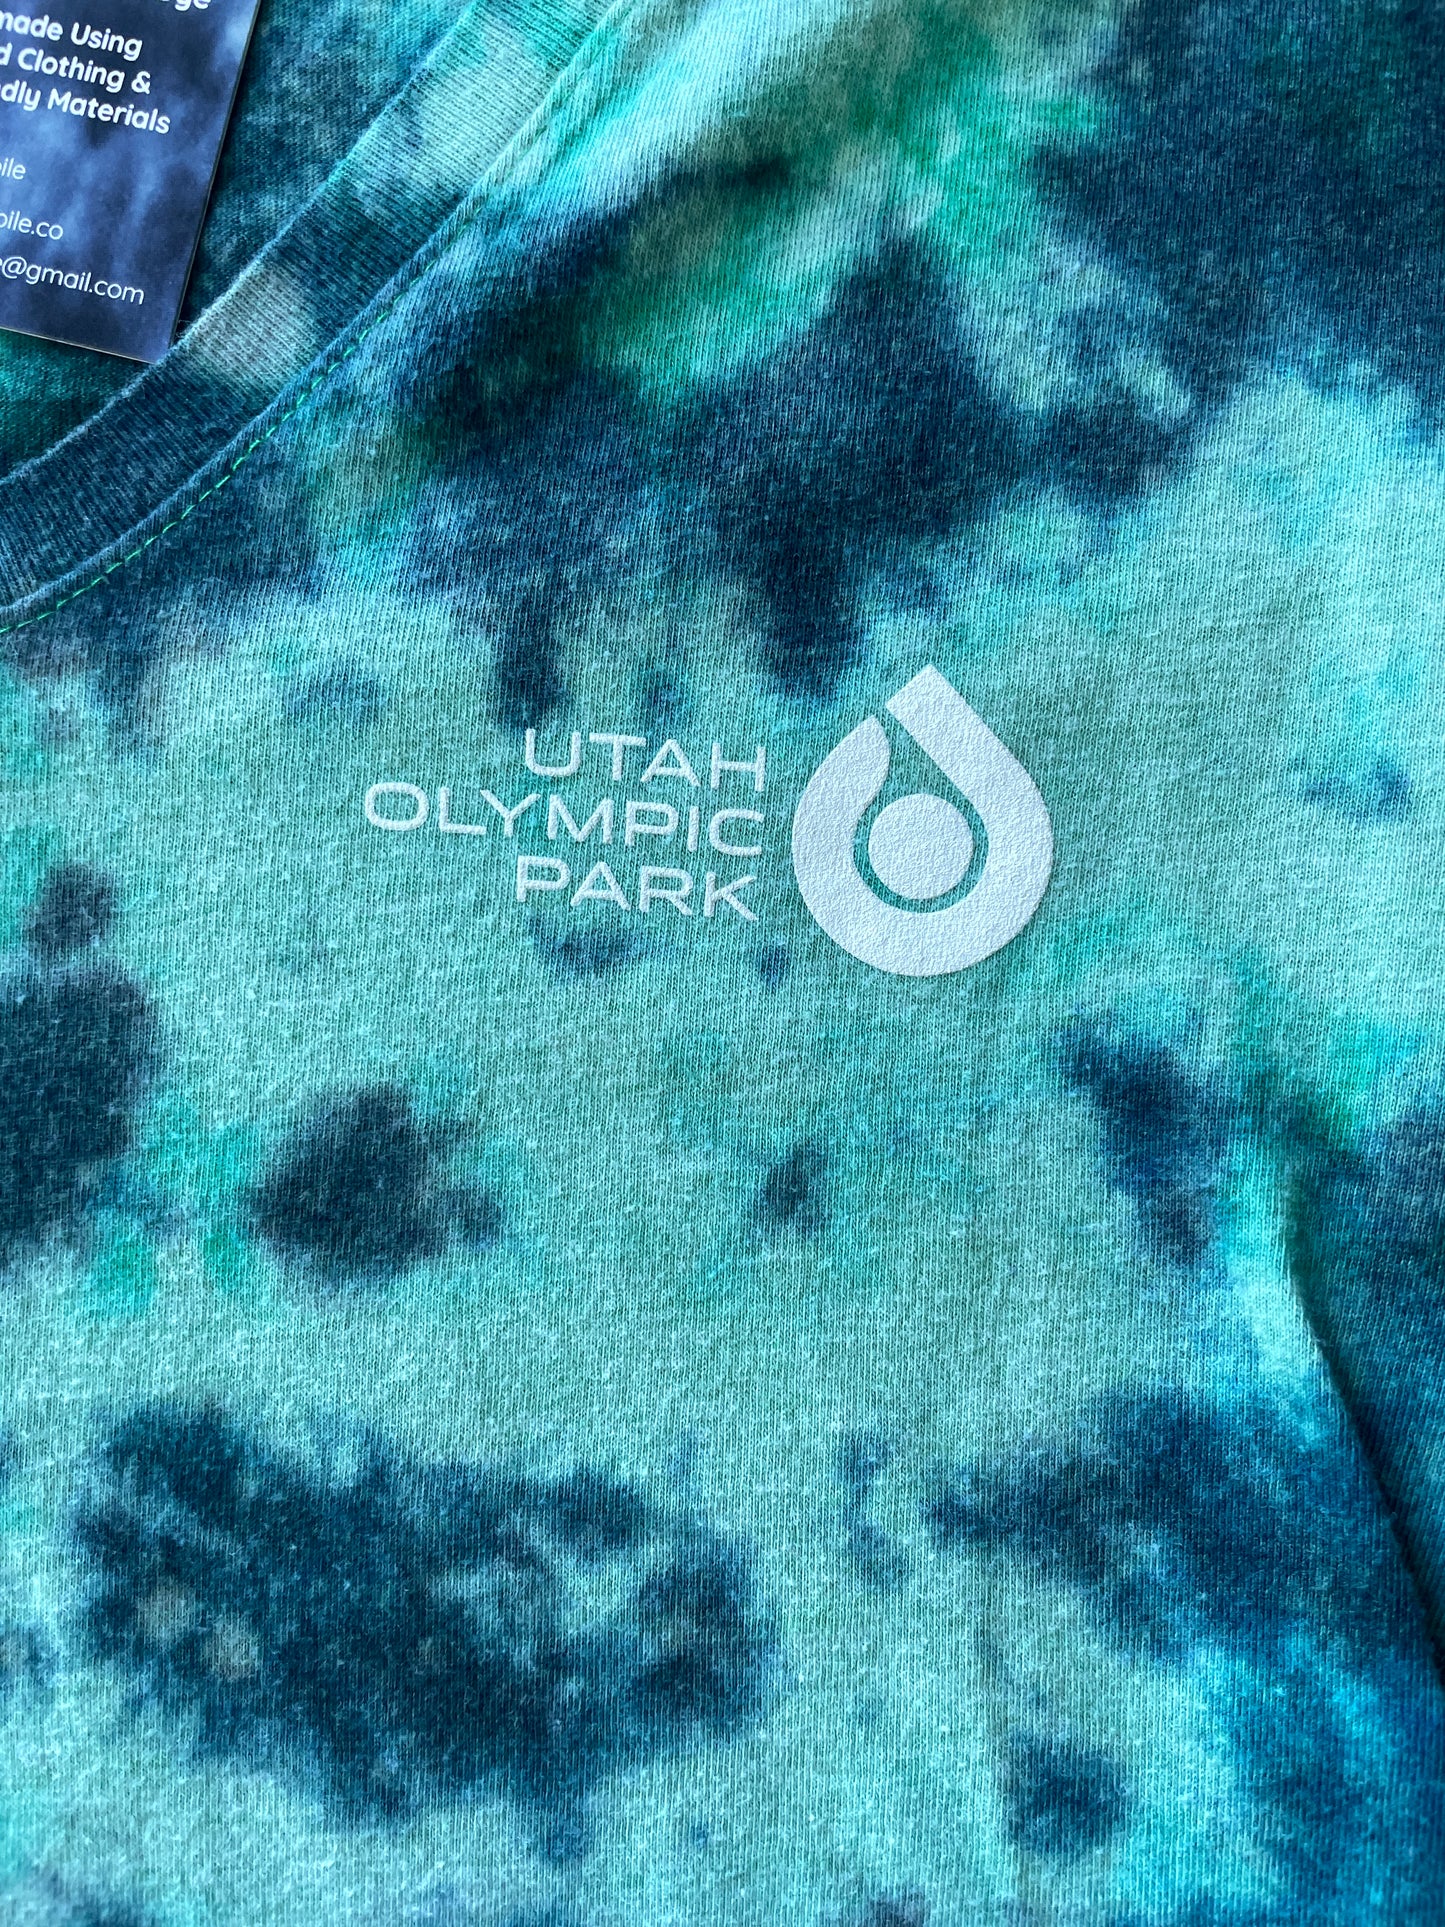 LARGE Women’s Utah Olympic Park Handmade Reverse Tie Dye Short Sleeve T-Shirt | One-Of-a-Kind Upcycled Green and Gray Crumpled Top